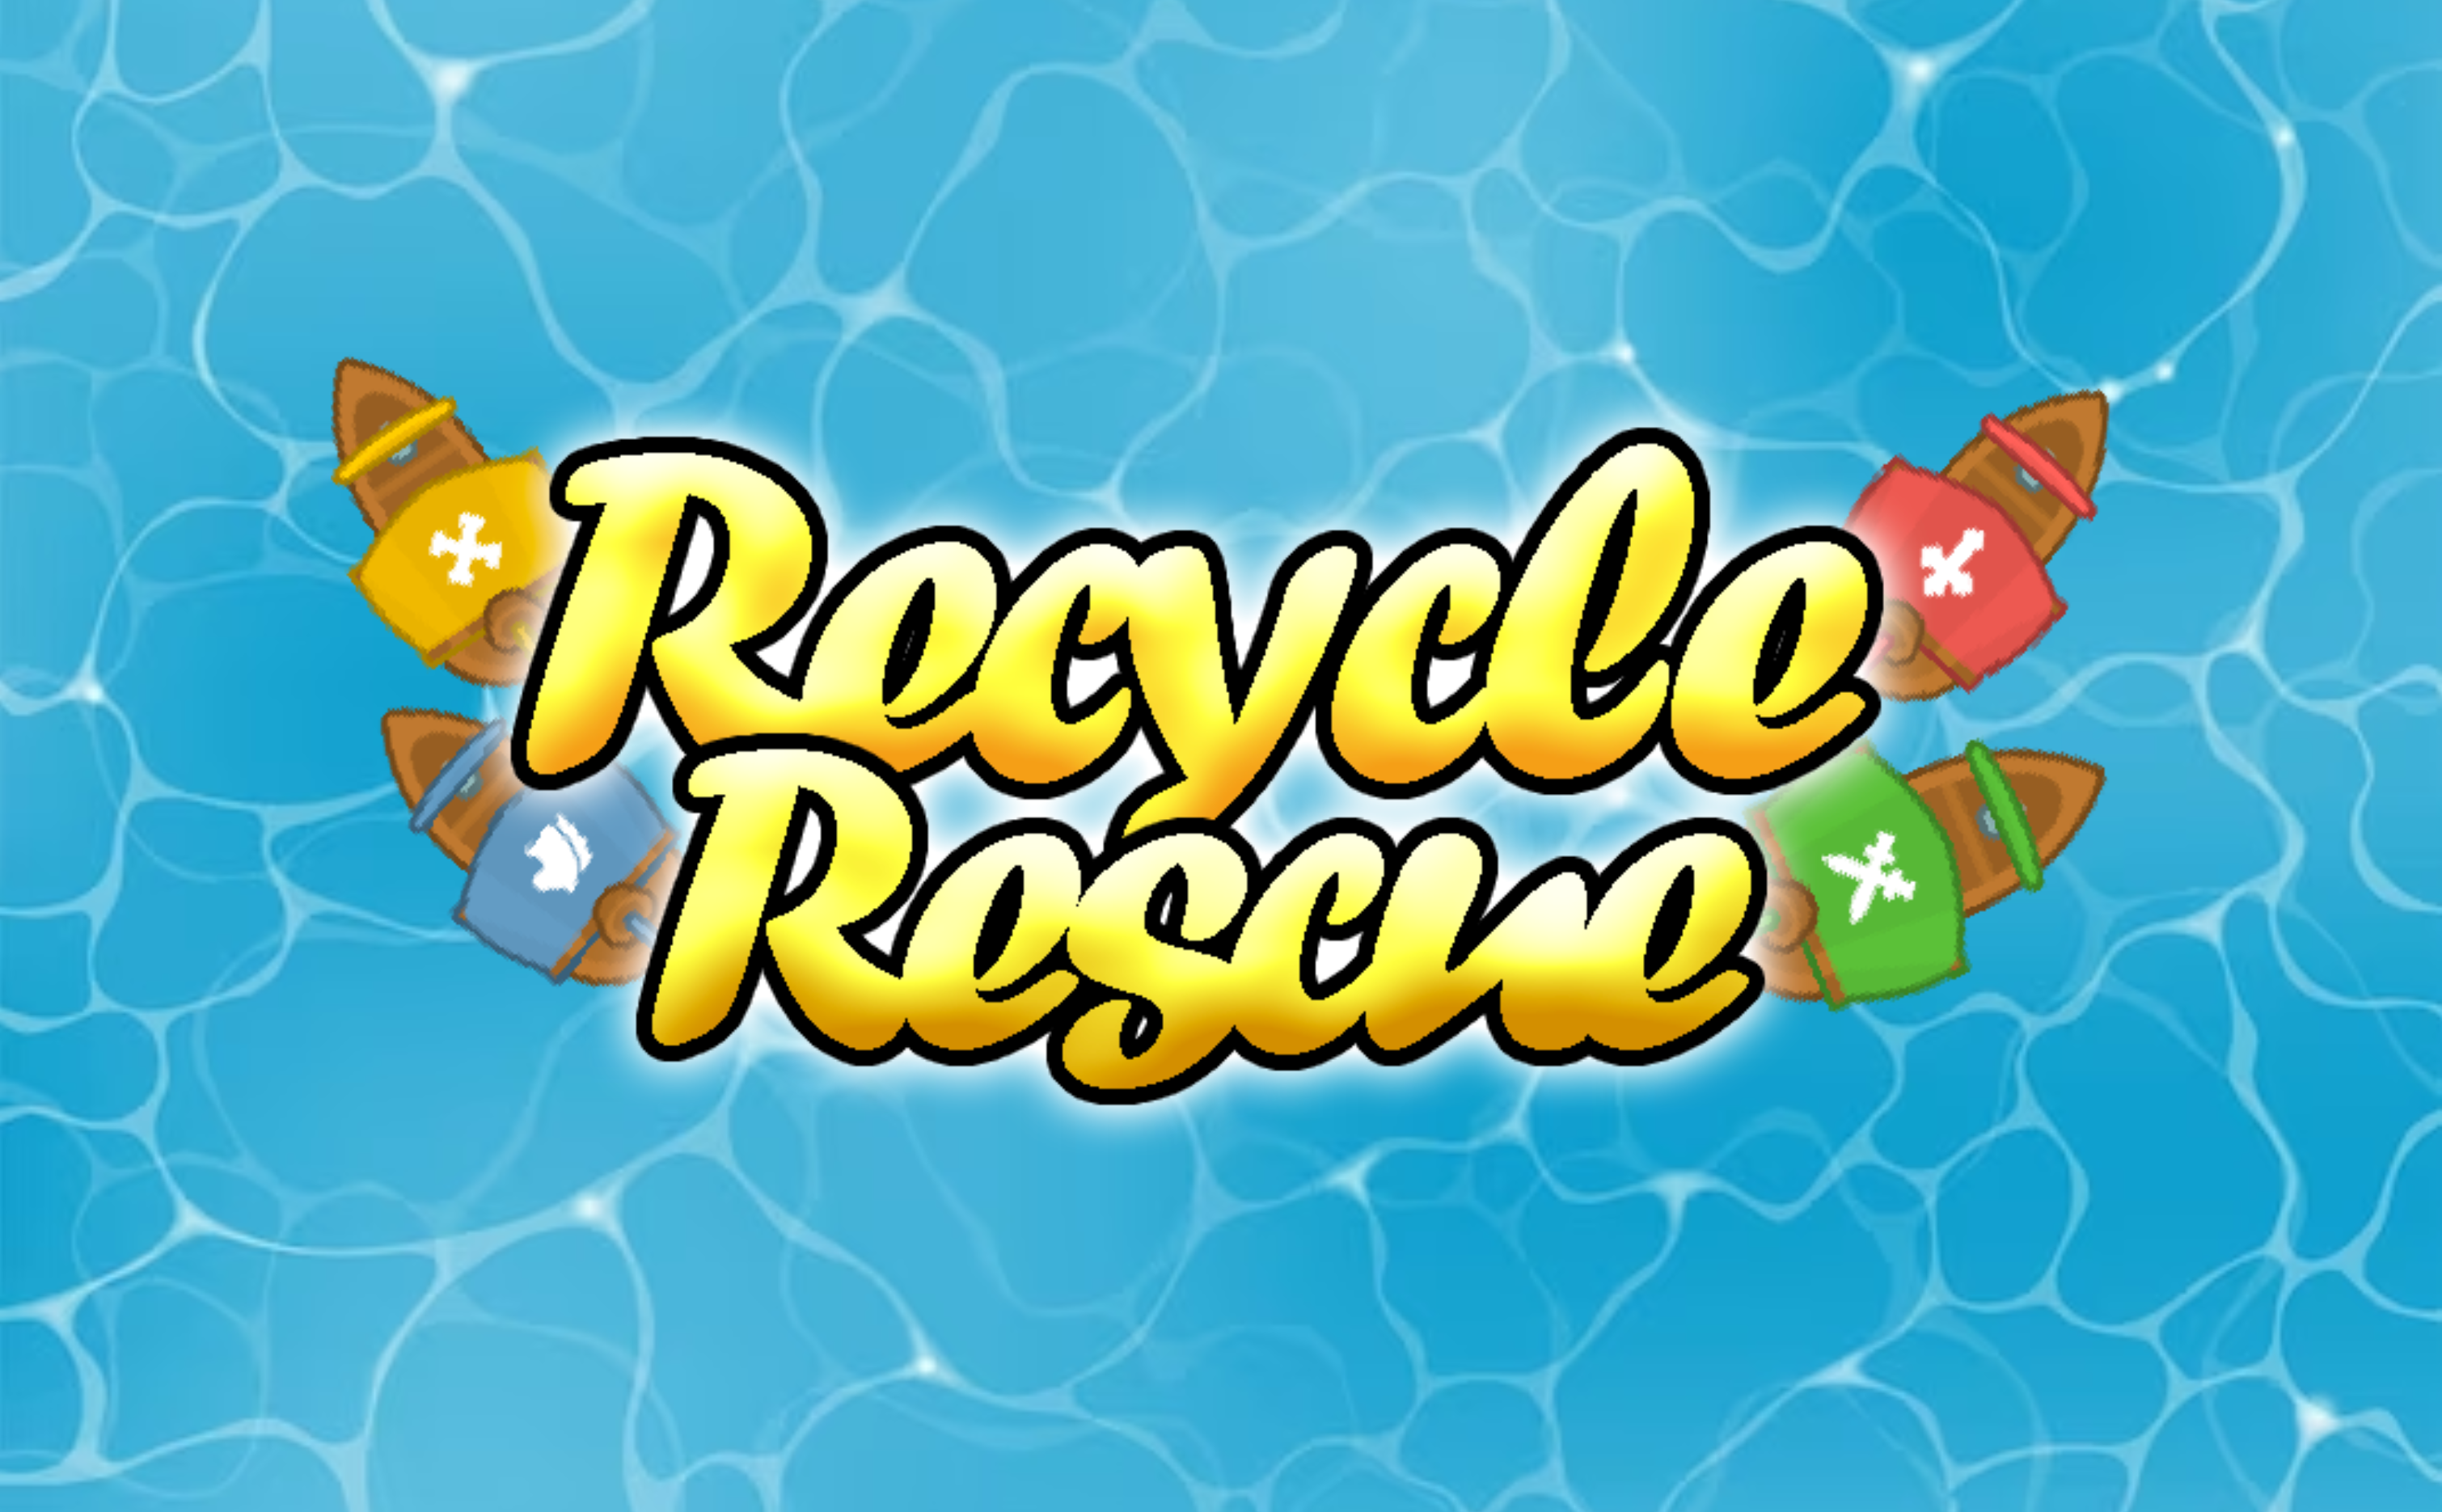 Recycle Rescue